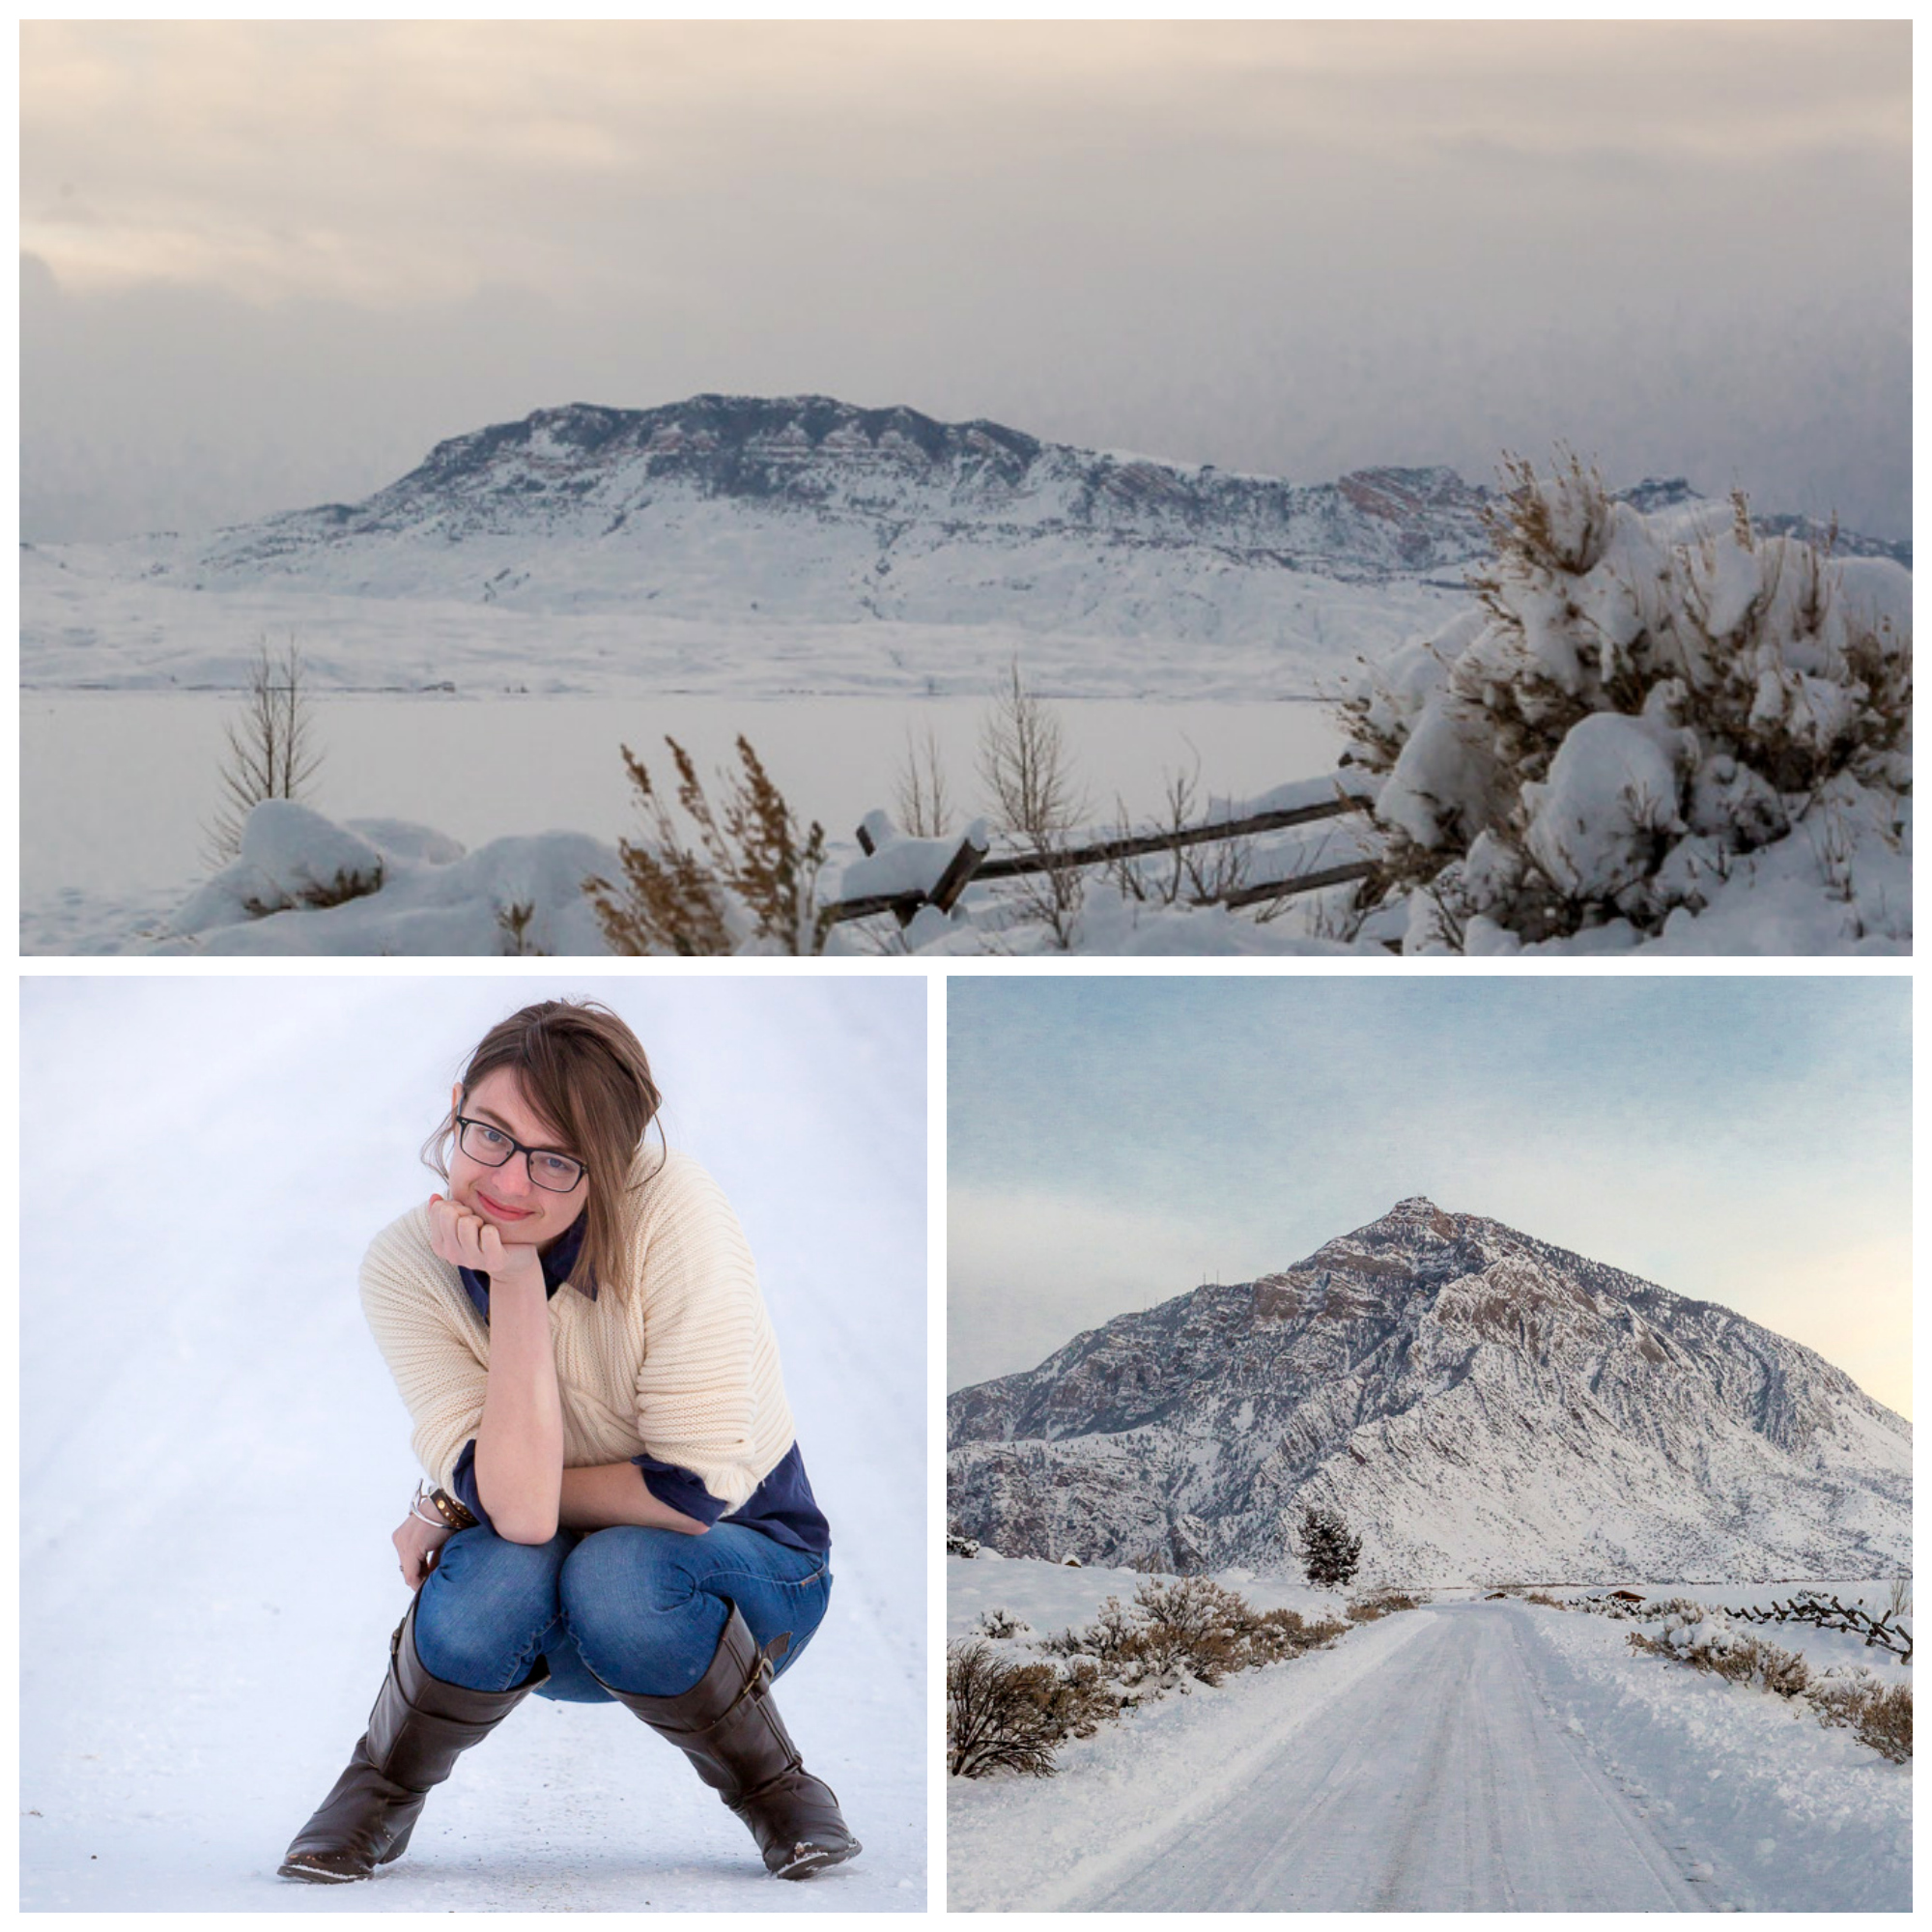 Tomboy, snow, never fully dressed, withoutastyle, sweater, layers, popbasic shirt, wyoming,